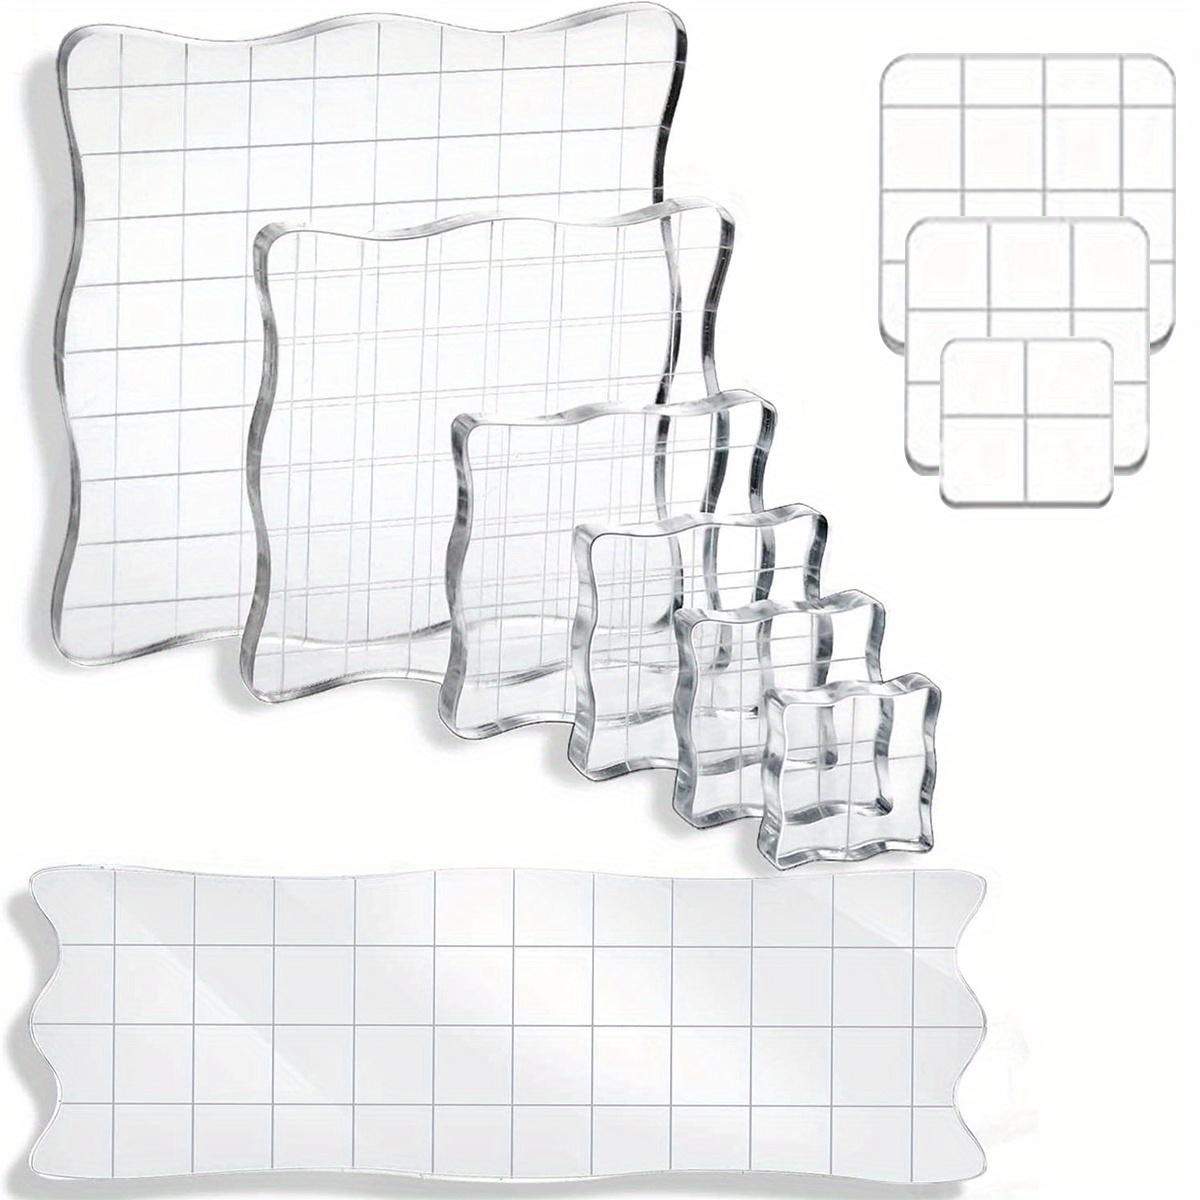 4 Pieces Acrylic Stamp Blocks with Grid and Grip, Clear Stamping